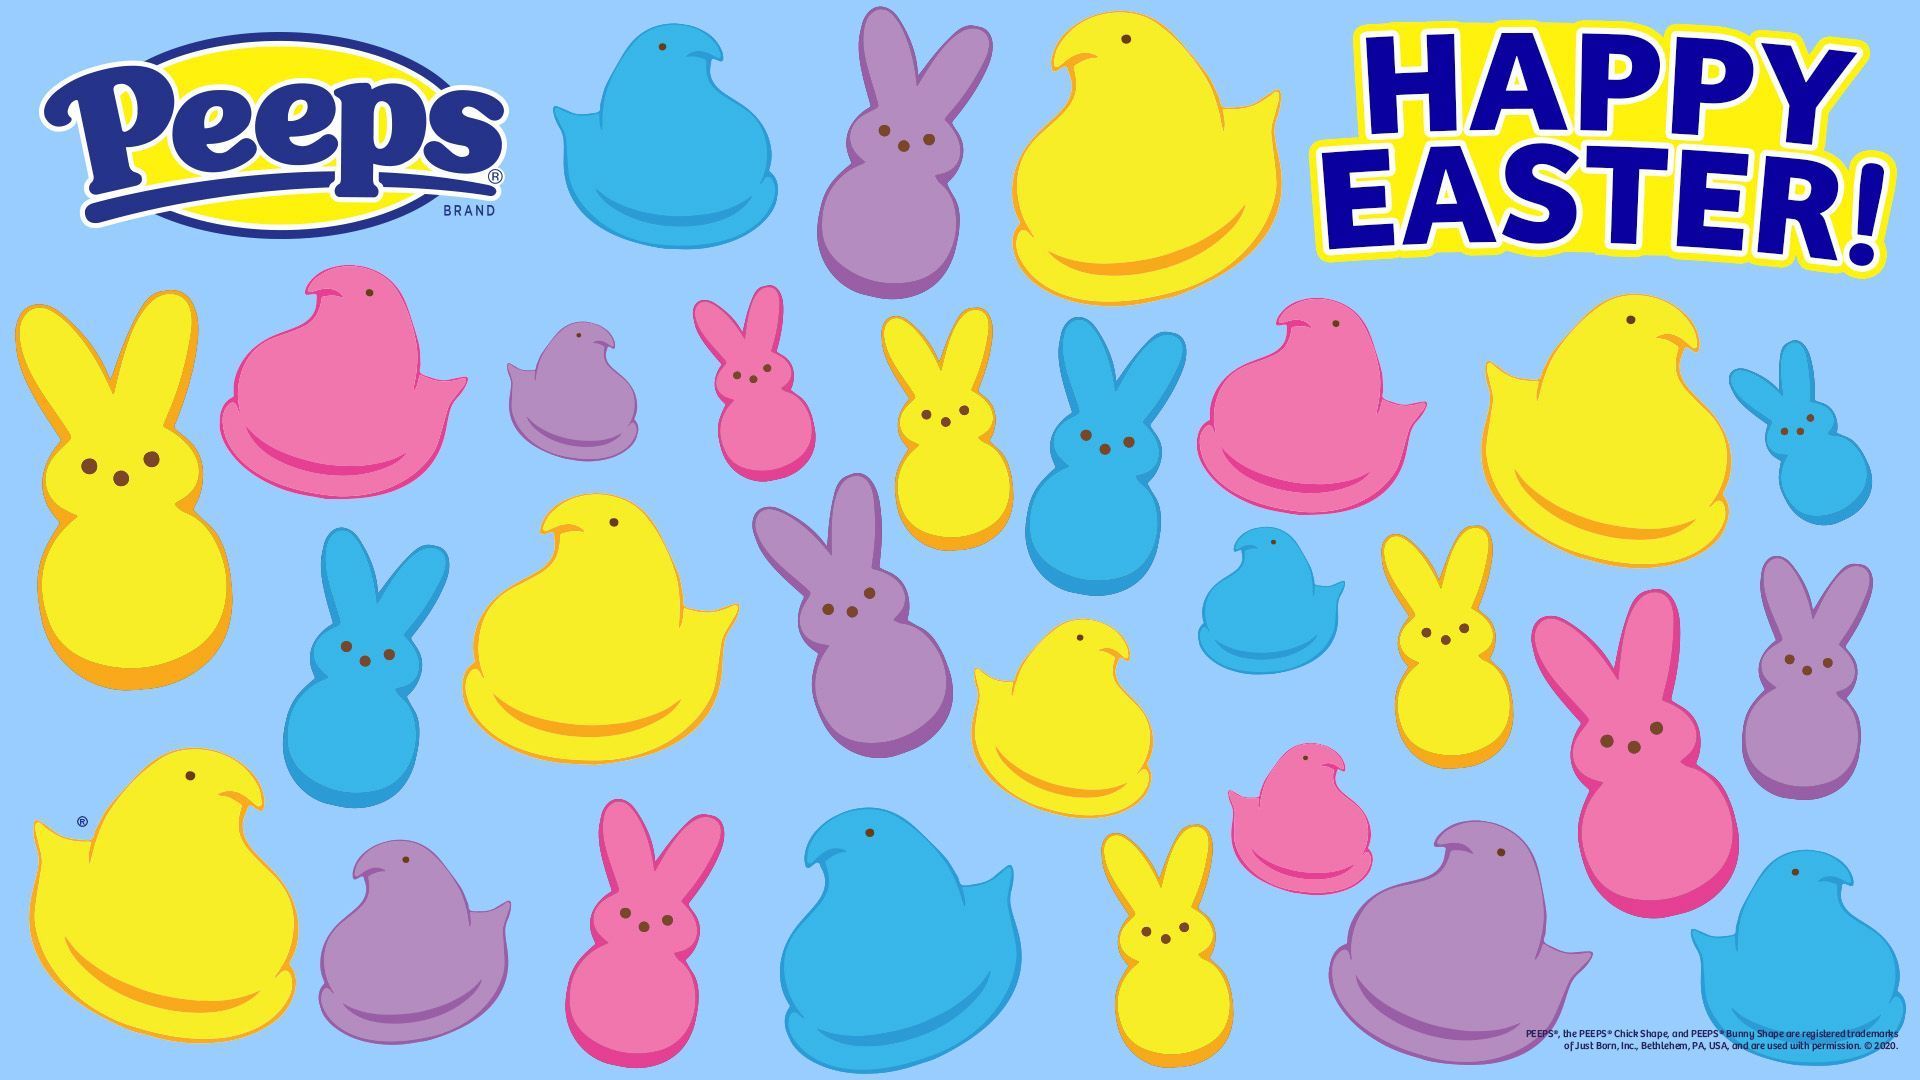 Best Easter Background to Download Zoom Background for a Virtual Easter